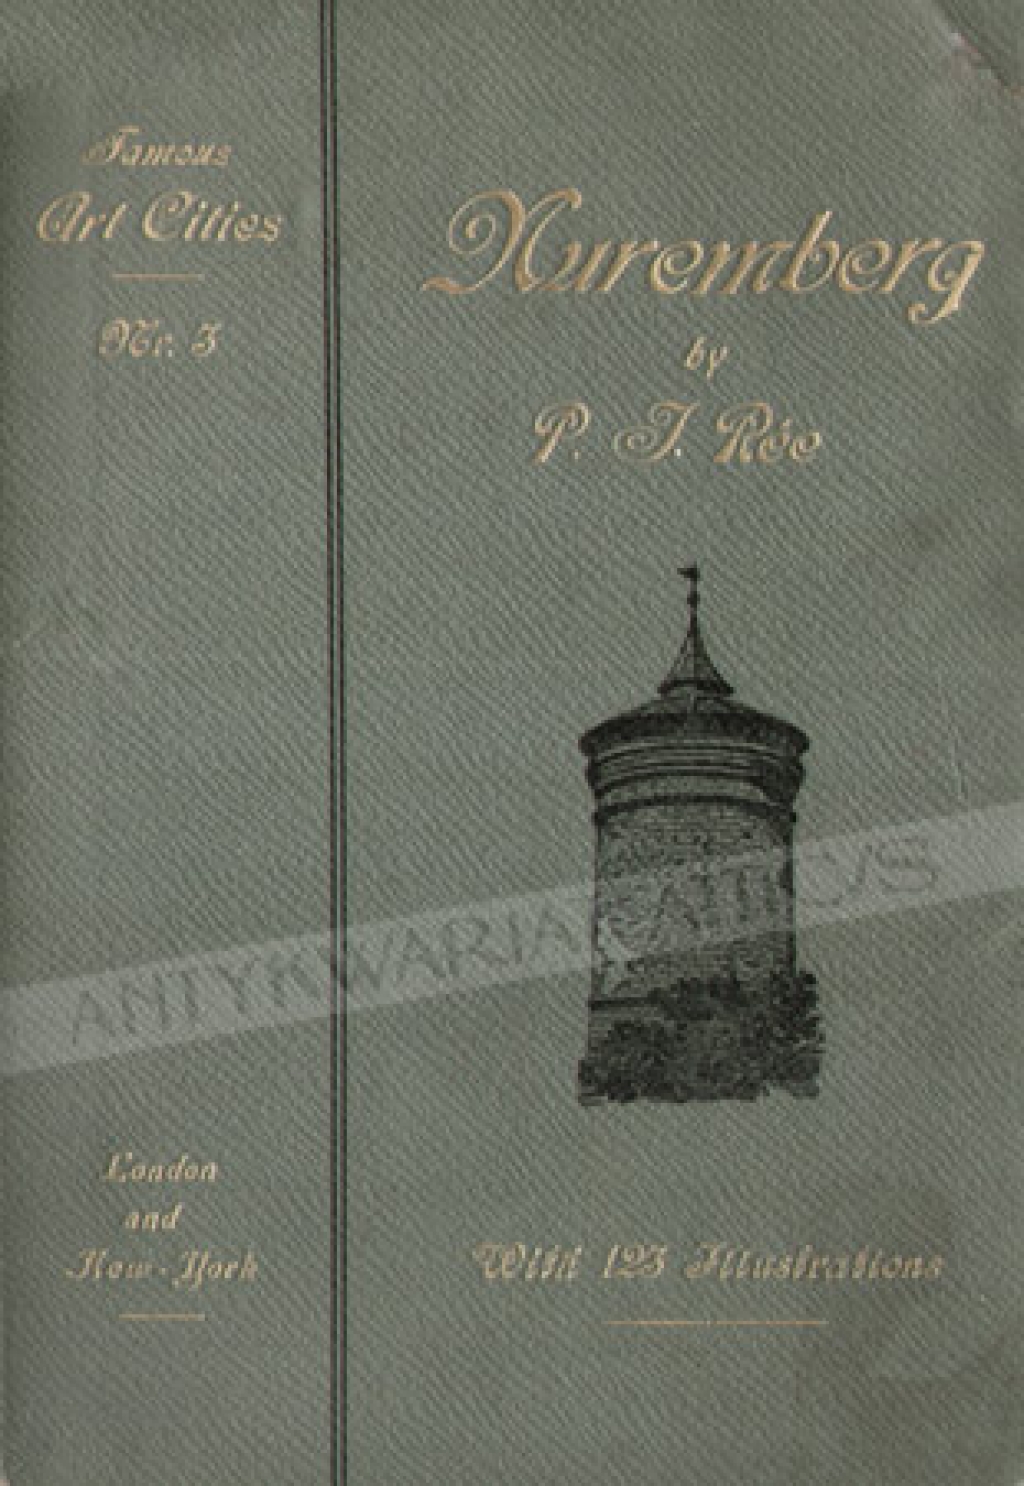 Nuremberg and Its Art to the End of the 18th Century [Norymberga]